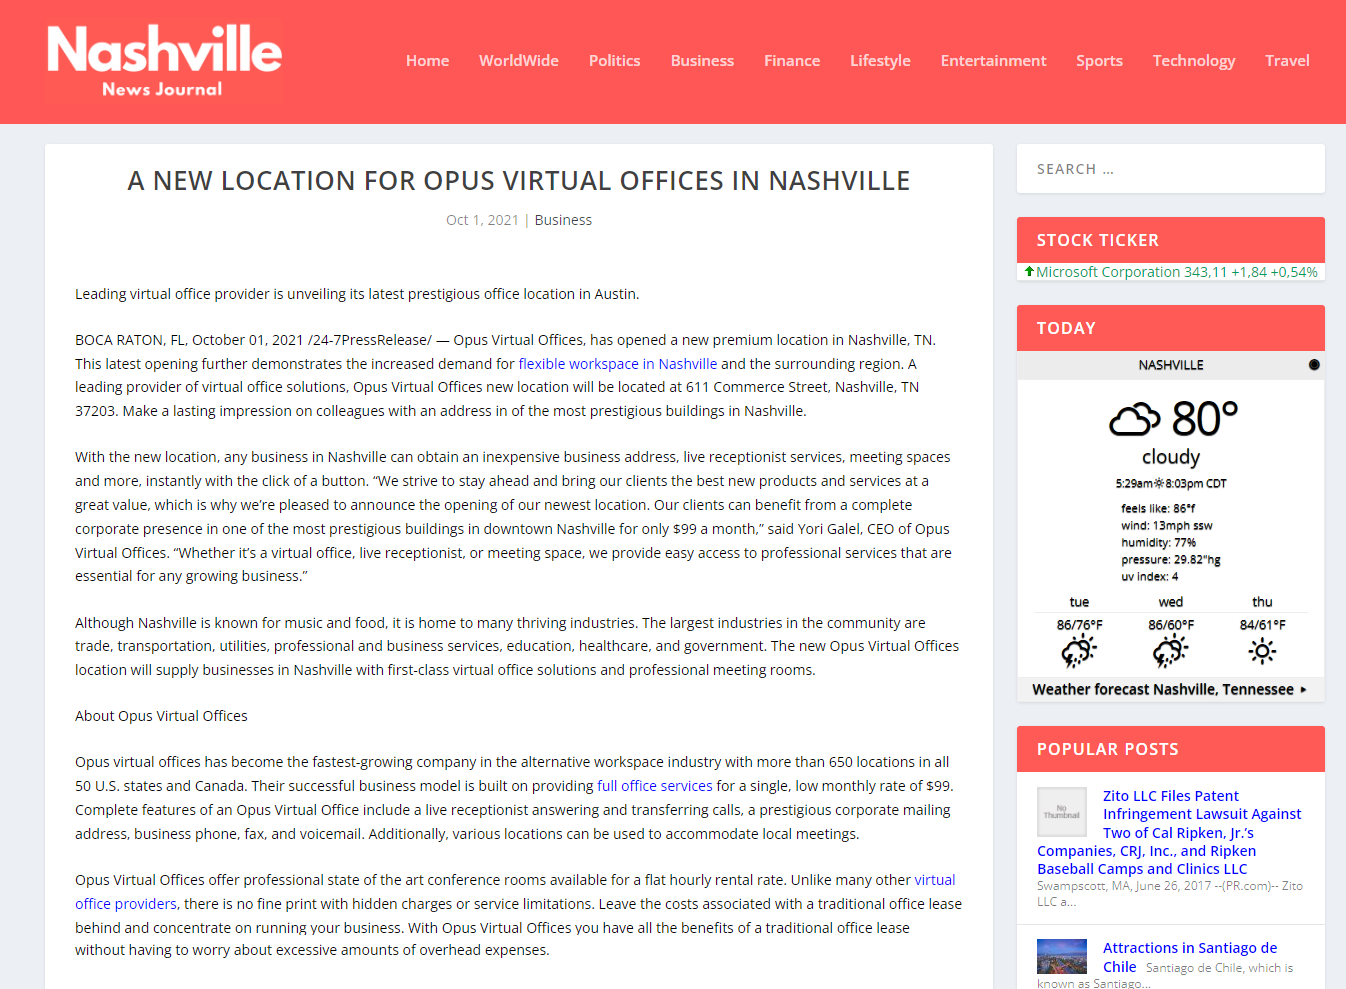 A New Location for Opus Virtual Offices in Nashville